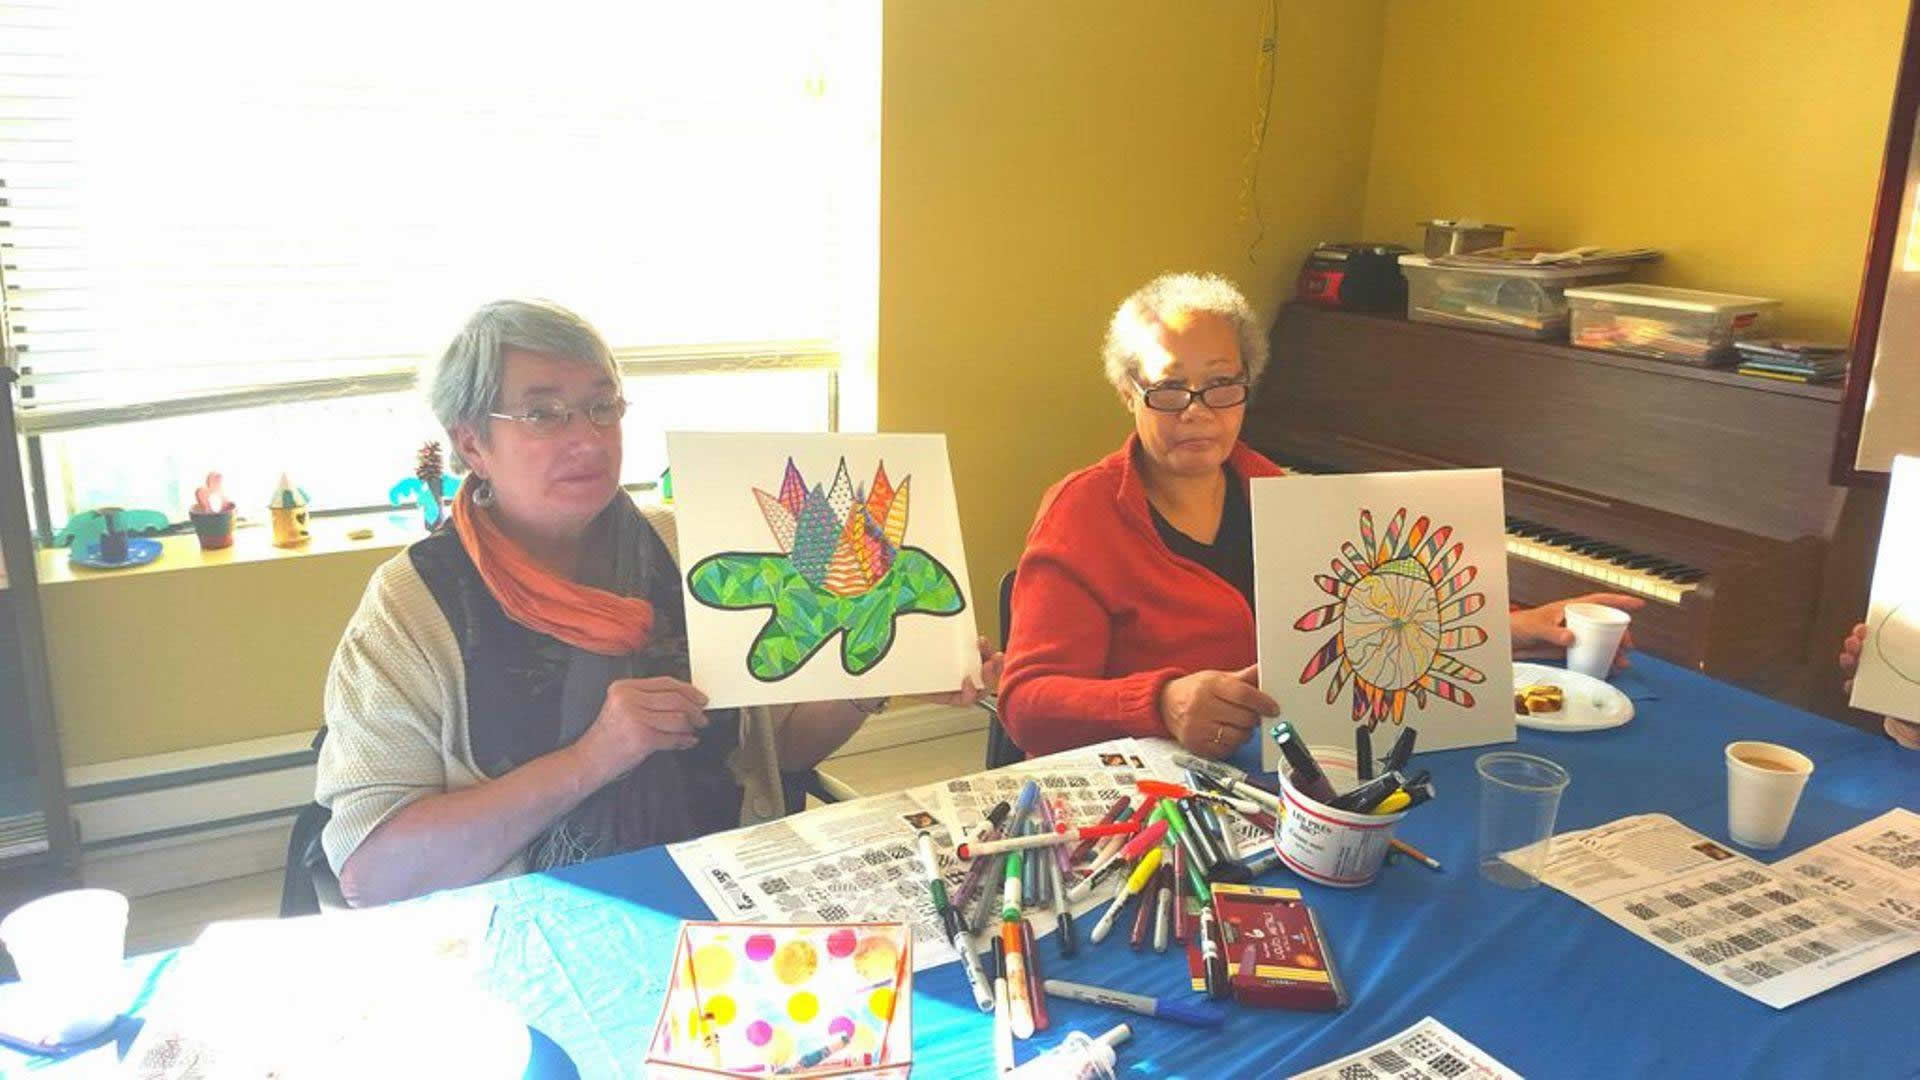 Display of art from an Art With A Heart not-for-profit group therapy session.